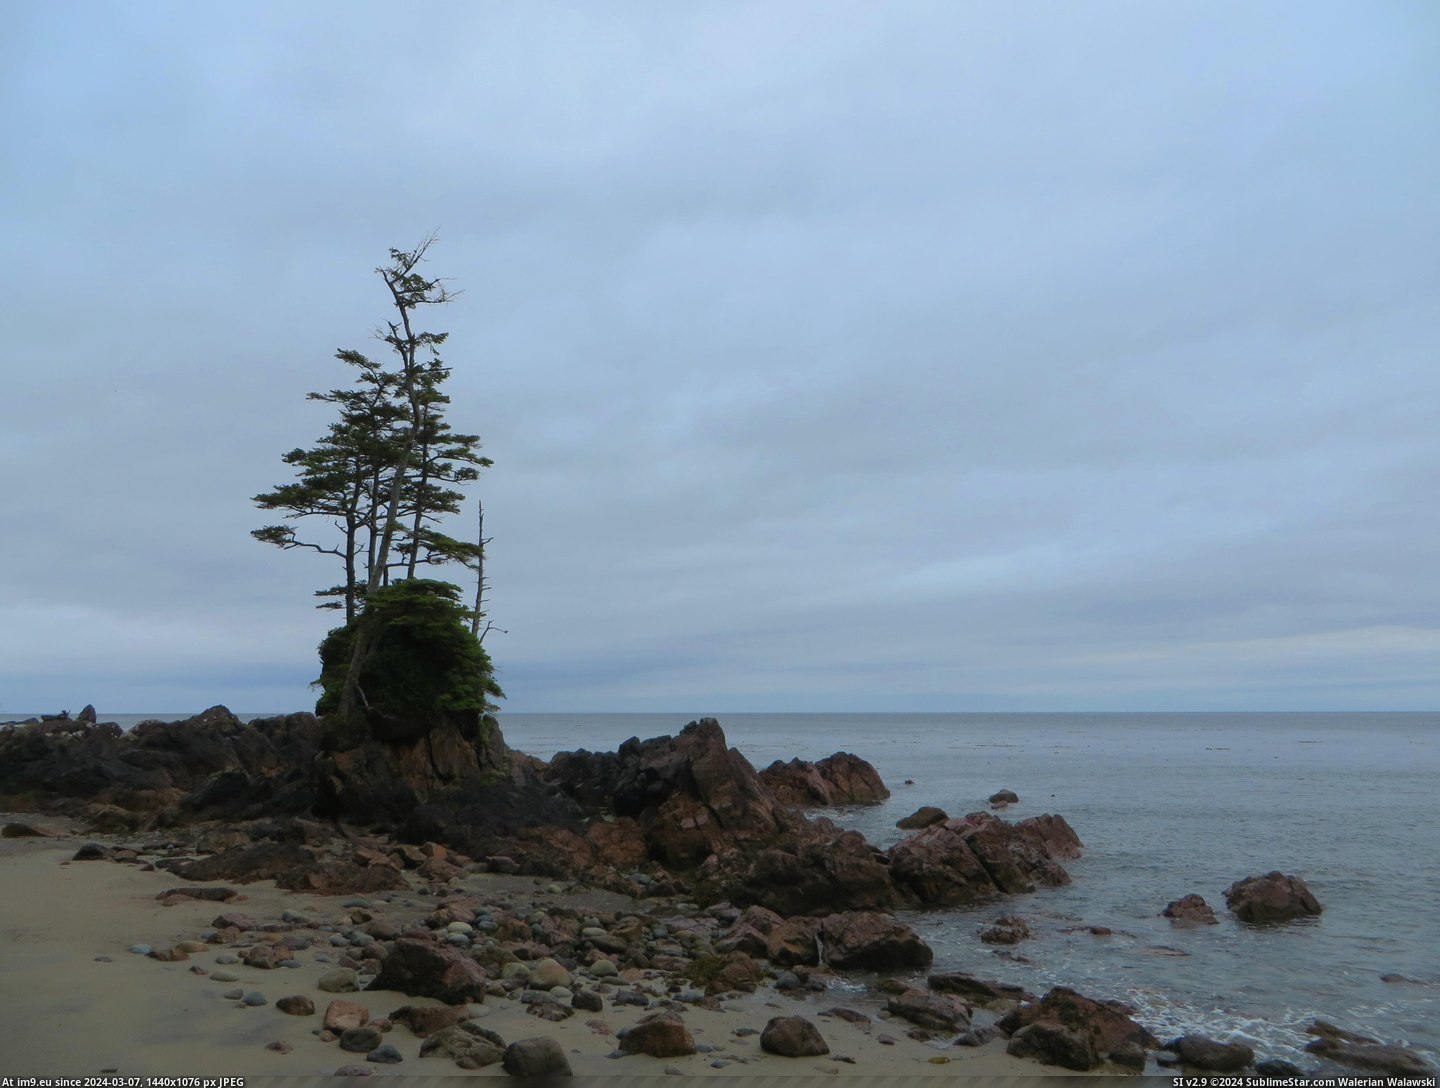 #Rock #Trees #Ocean #Storm #Facing #Spruce #Pillar #Pacific #Cape #Scott #Lone [Earthporn] Storm battered Spruce trees on a lone pillar of rock facing the open Pacific ocean. Cape Scott, BC.  [3967x2975] Pic. (Image of album My r/EARTHPORN favs))